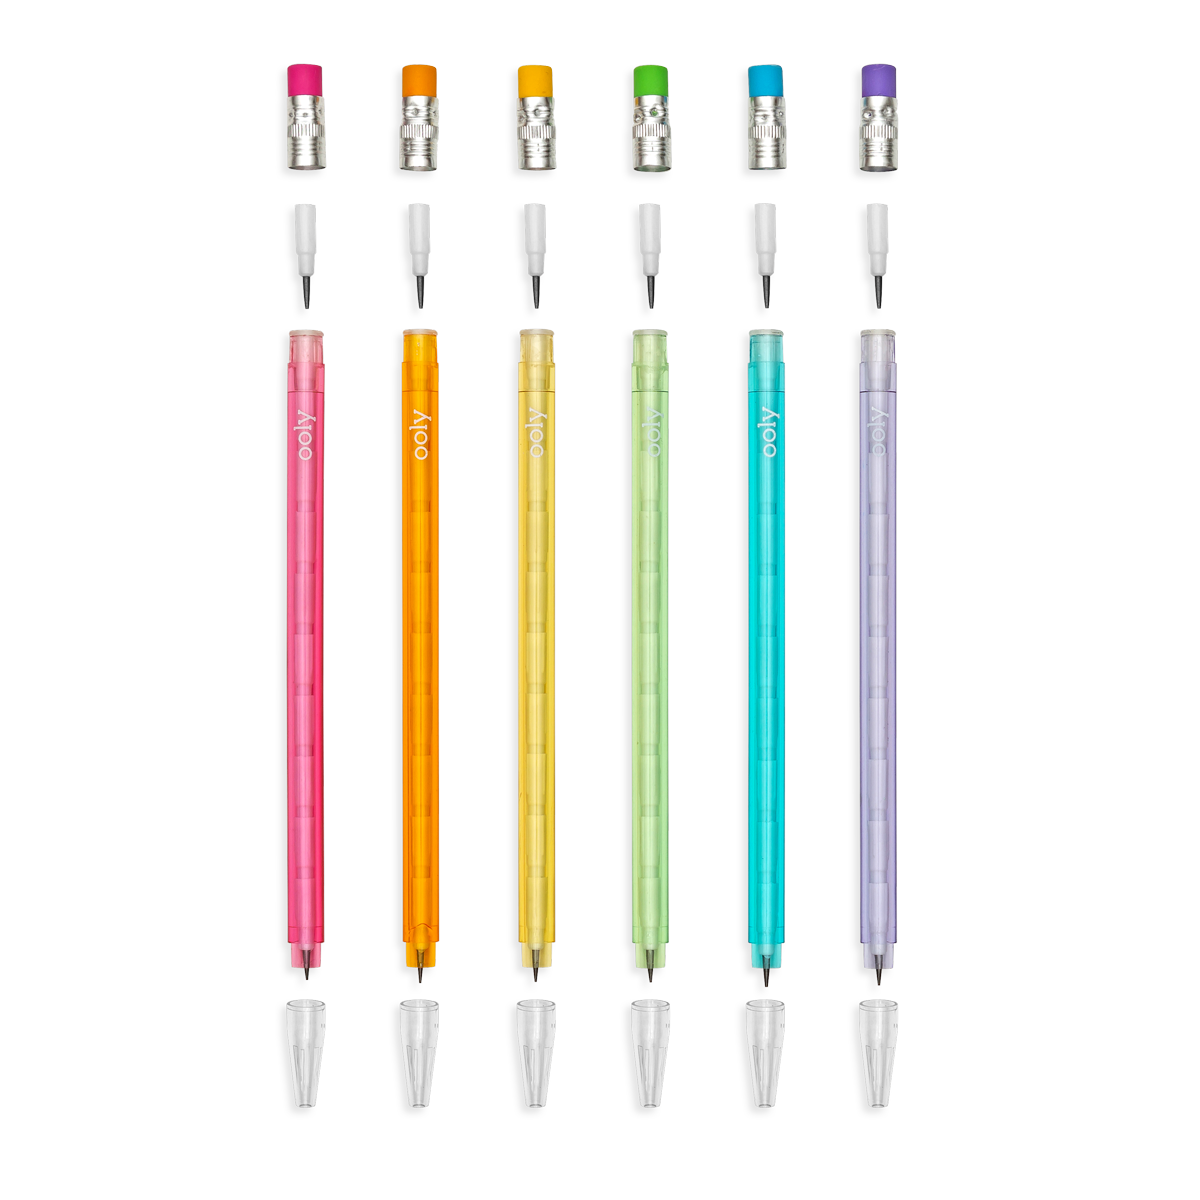 Stay Sharp Rainbow Mechanical Pencils lined up showing the refill points